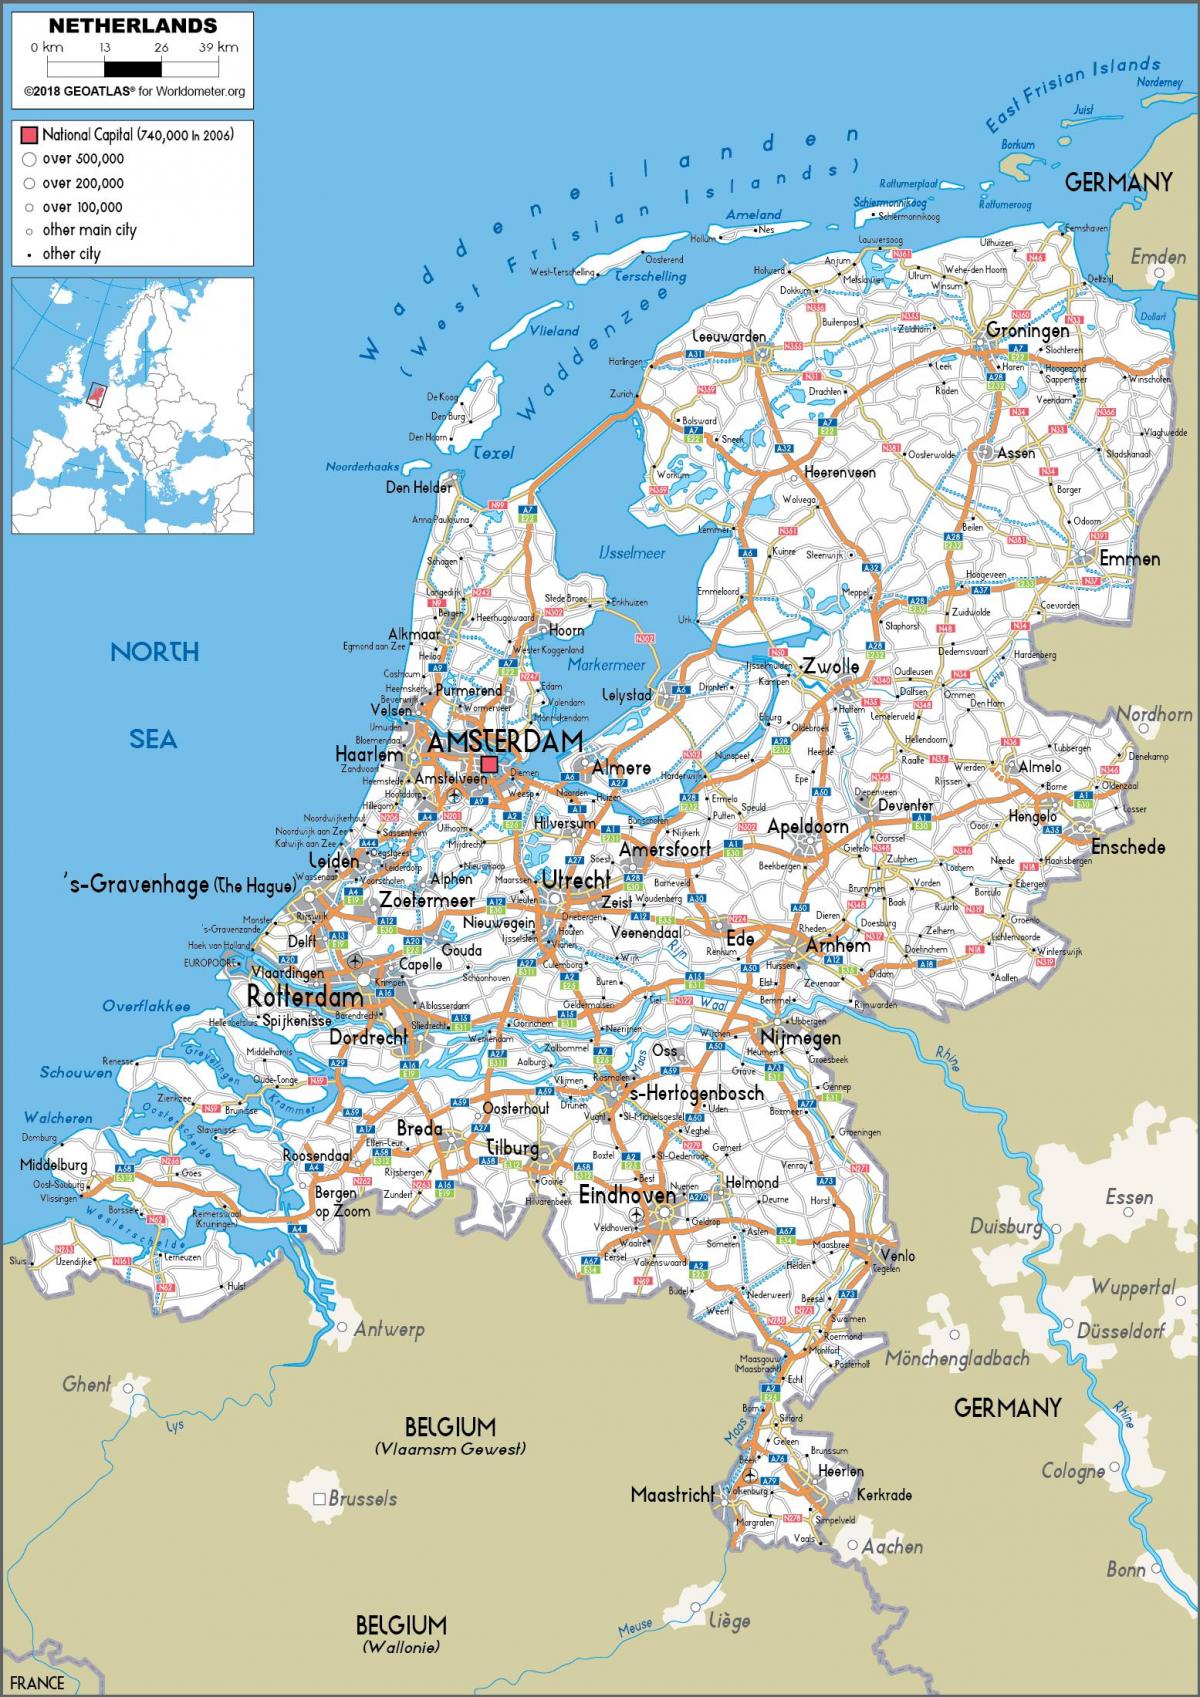 Driving map of Netherlands